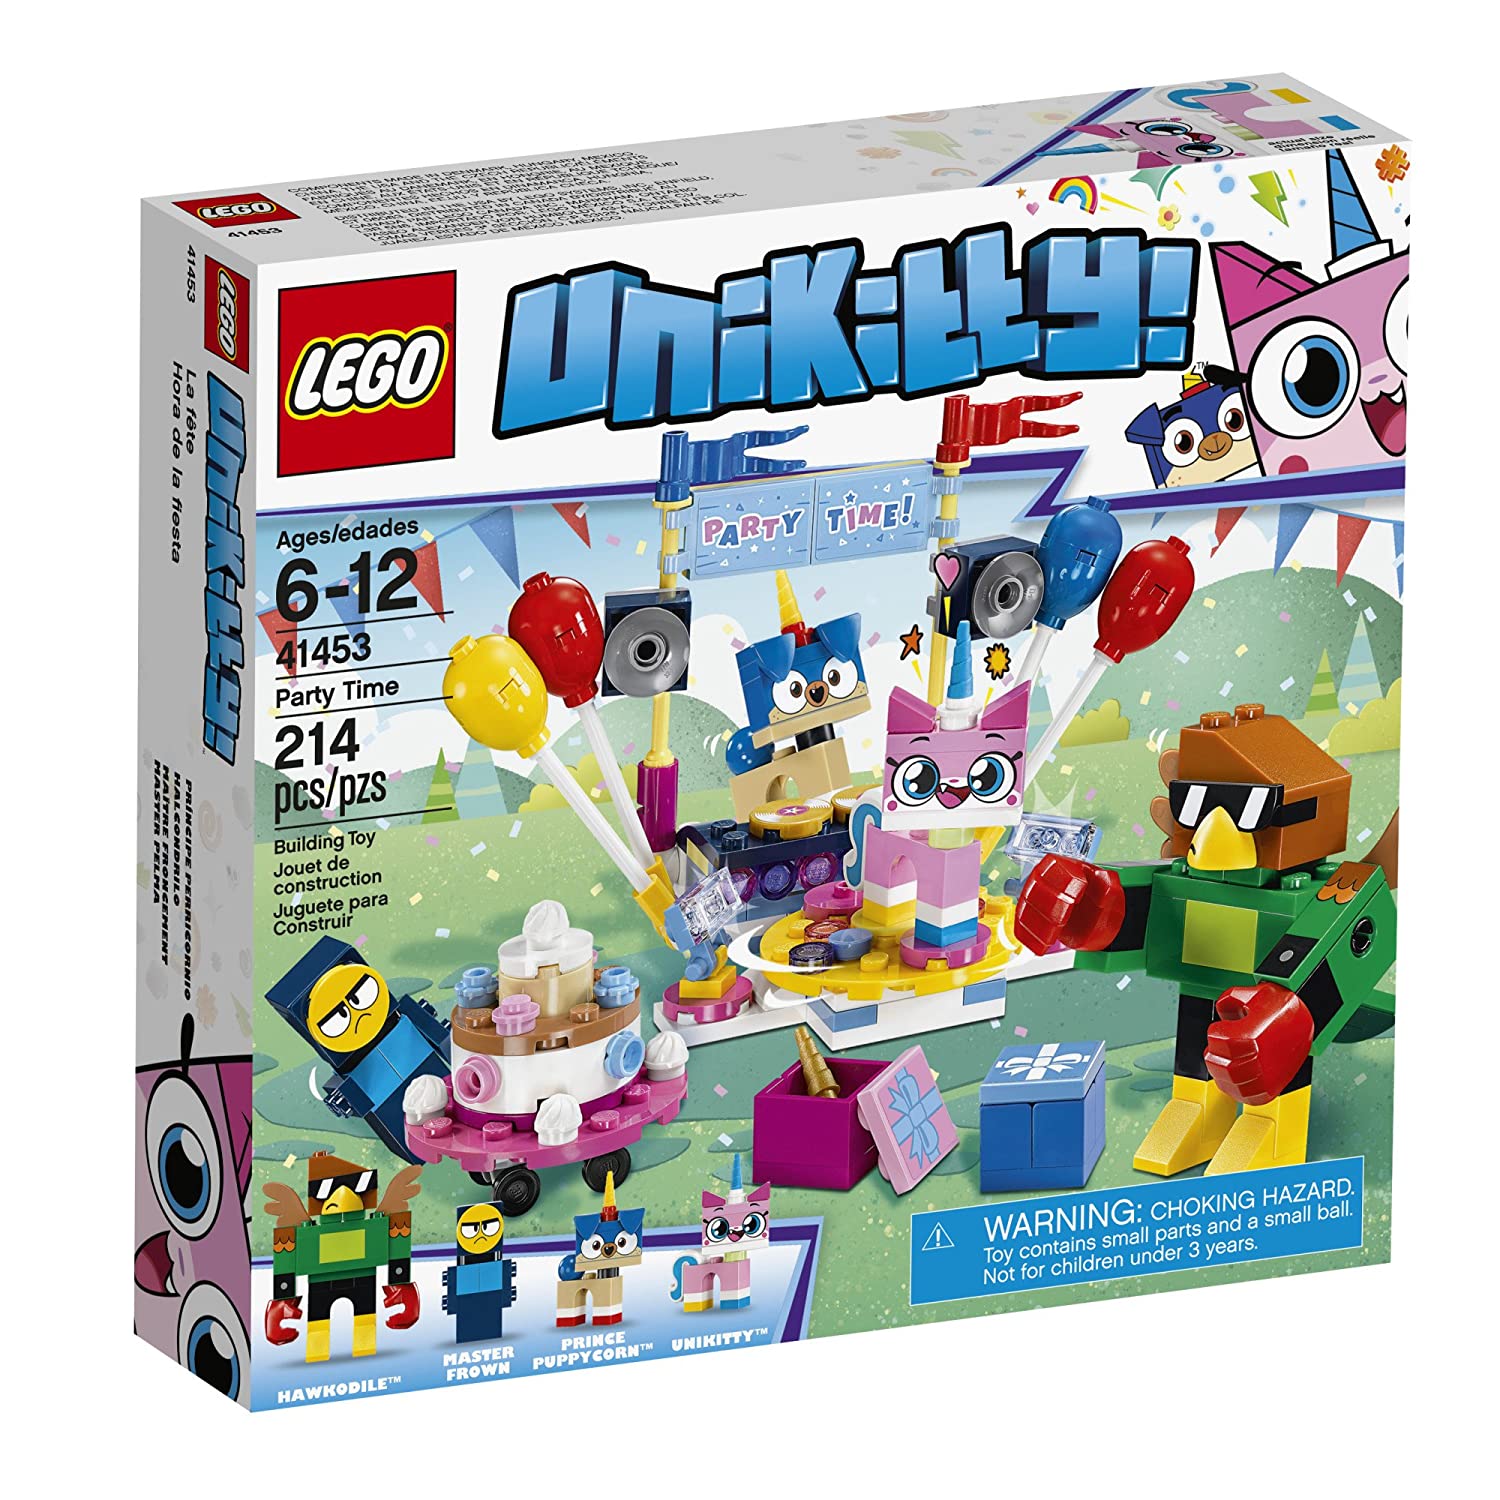 Top 7 Best LEGO Unikitty Sets Reviews in 2022 1